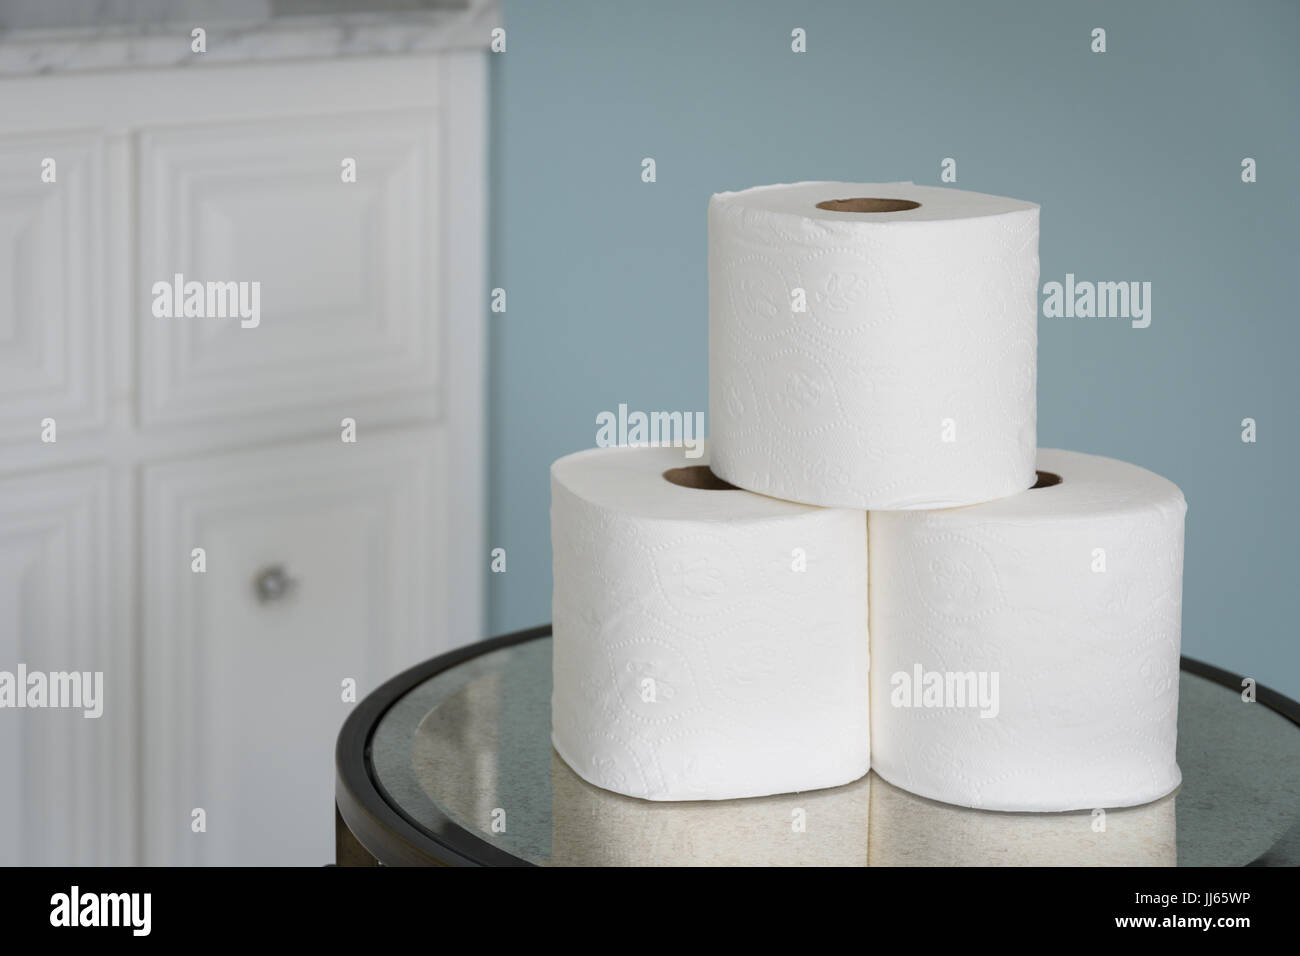 Stack of toilet paper rolls on mirrored table. Stock Photo